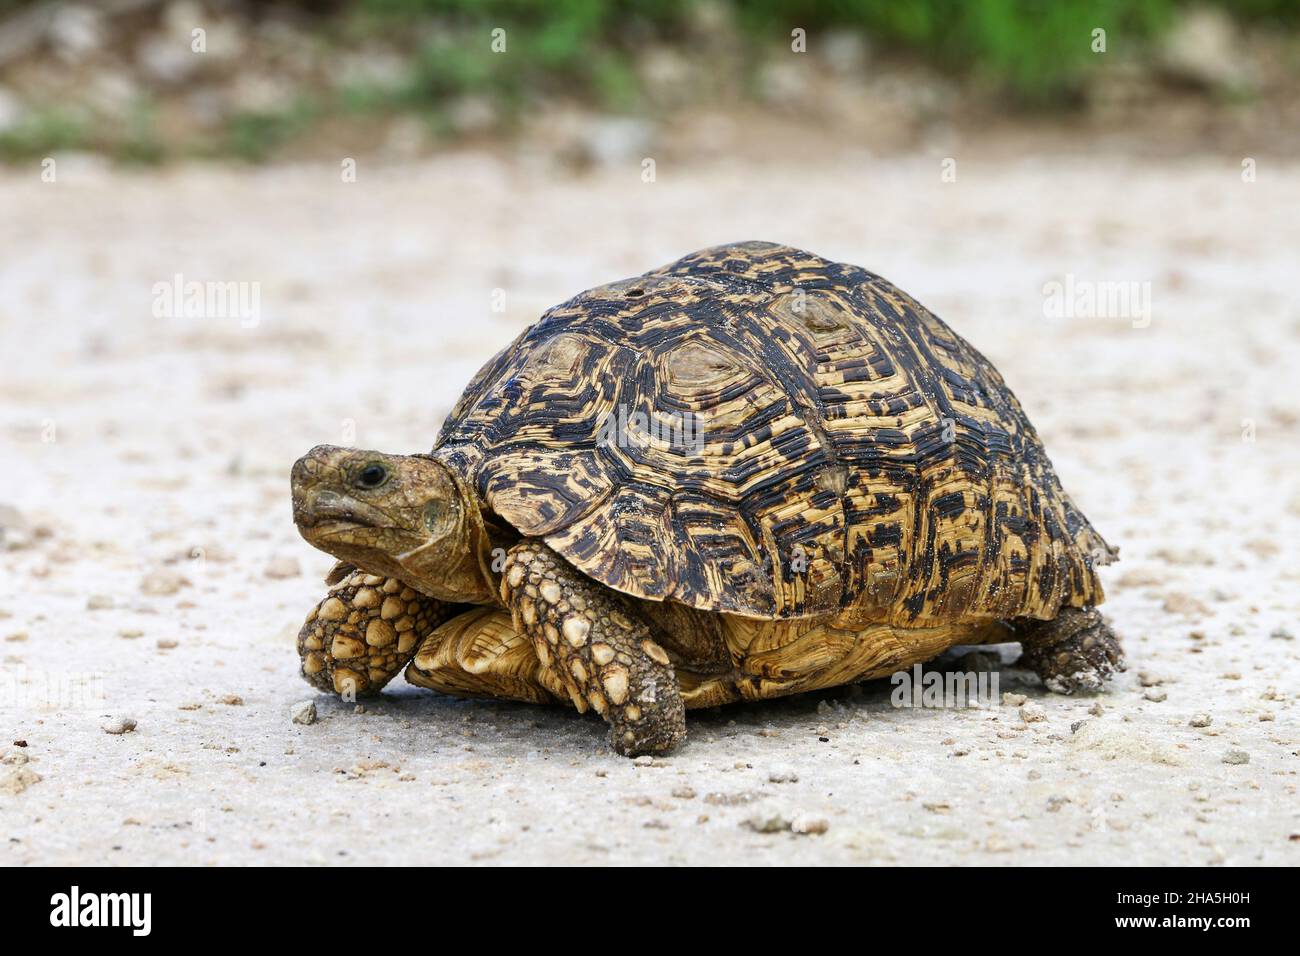 Turtle in a dry land Stock Photo